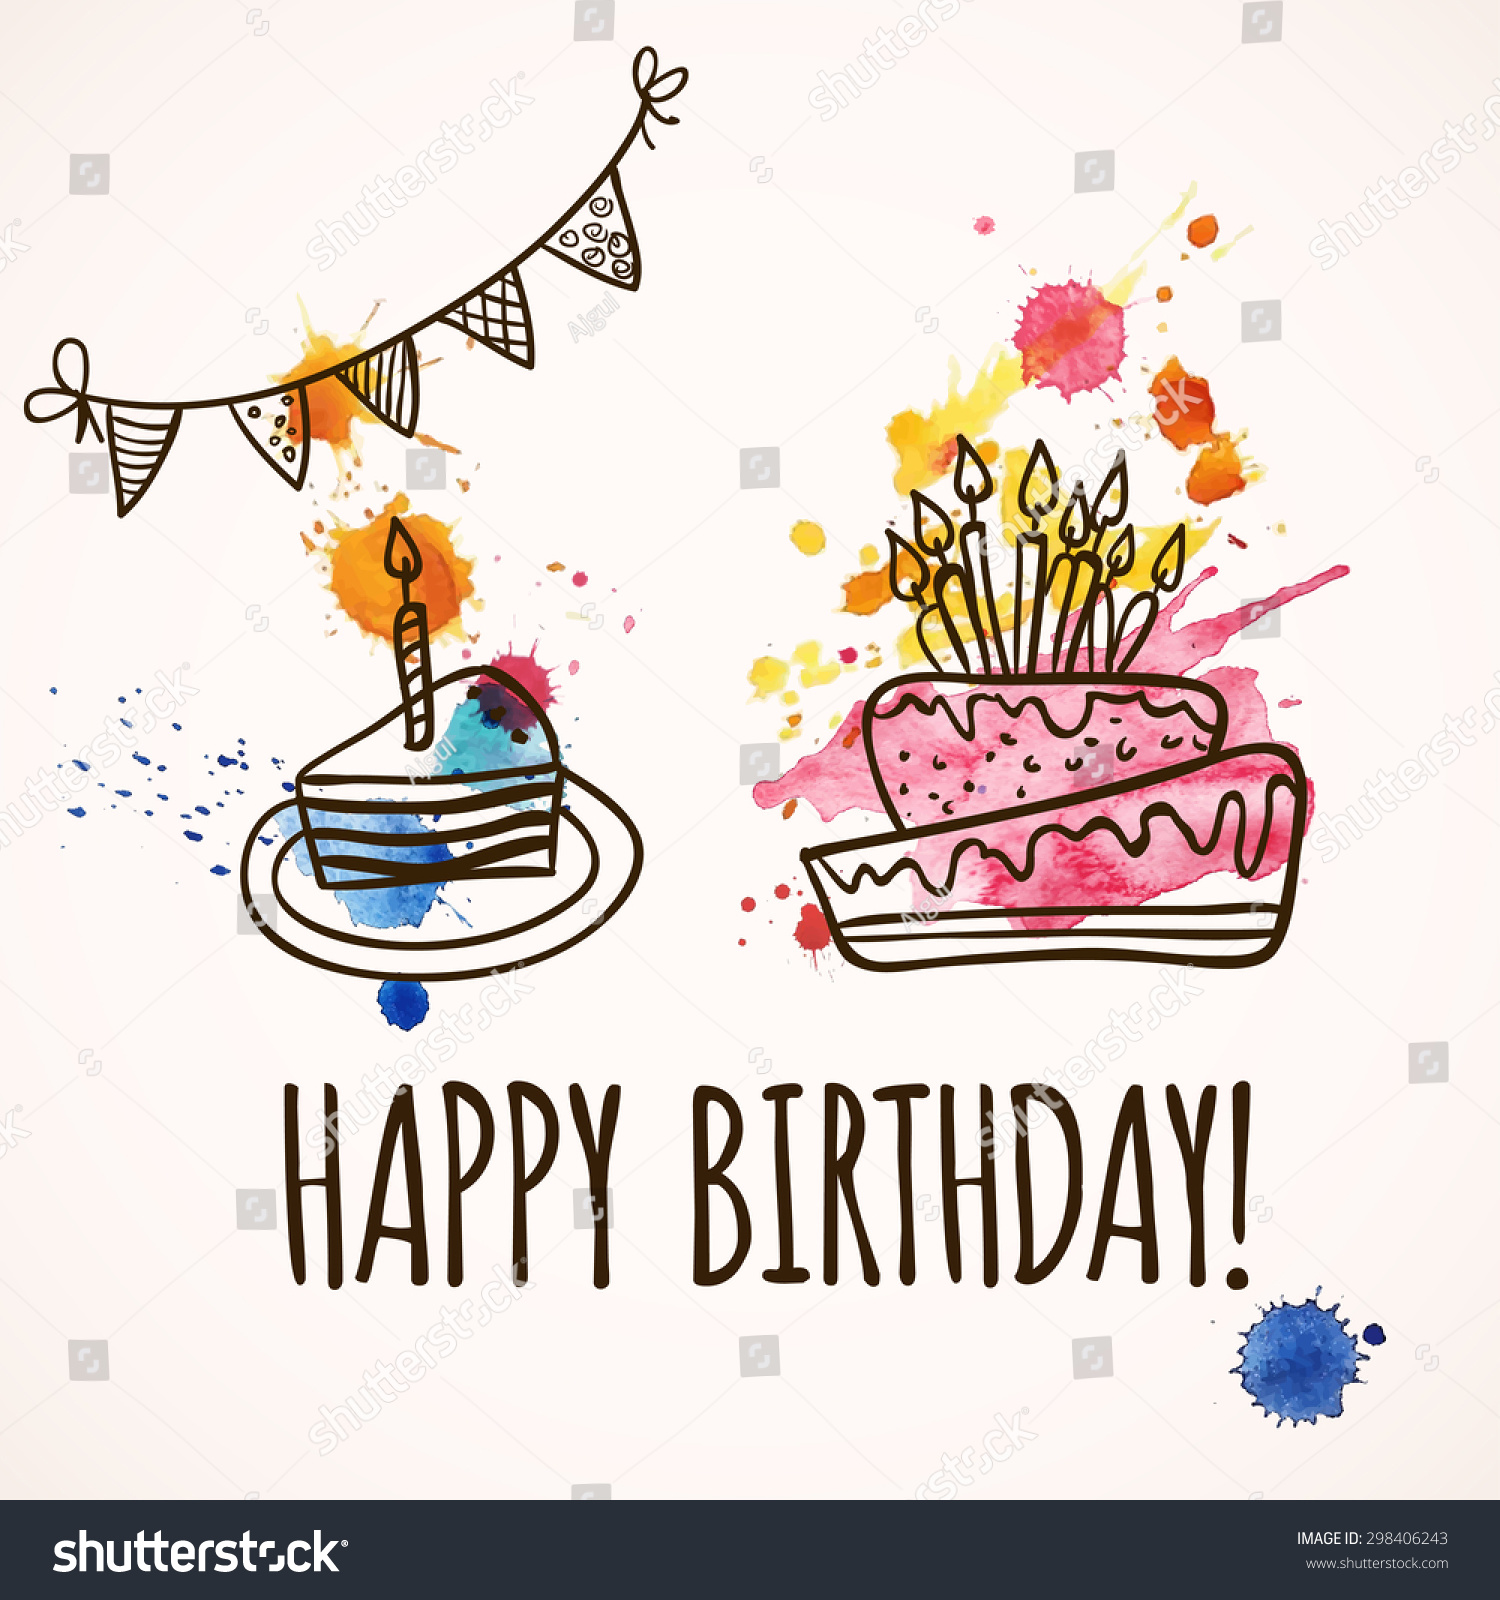 Happy Birthday Card With Doodle Hand Drawn Birthday Cake. Vector ...